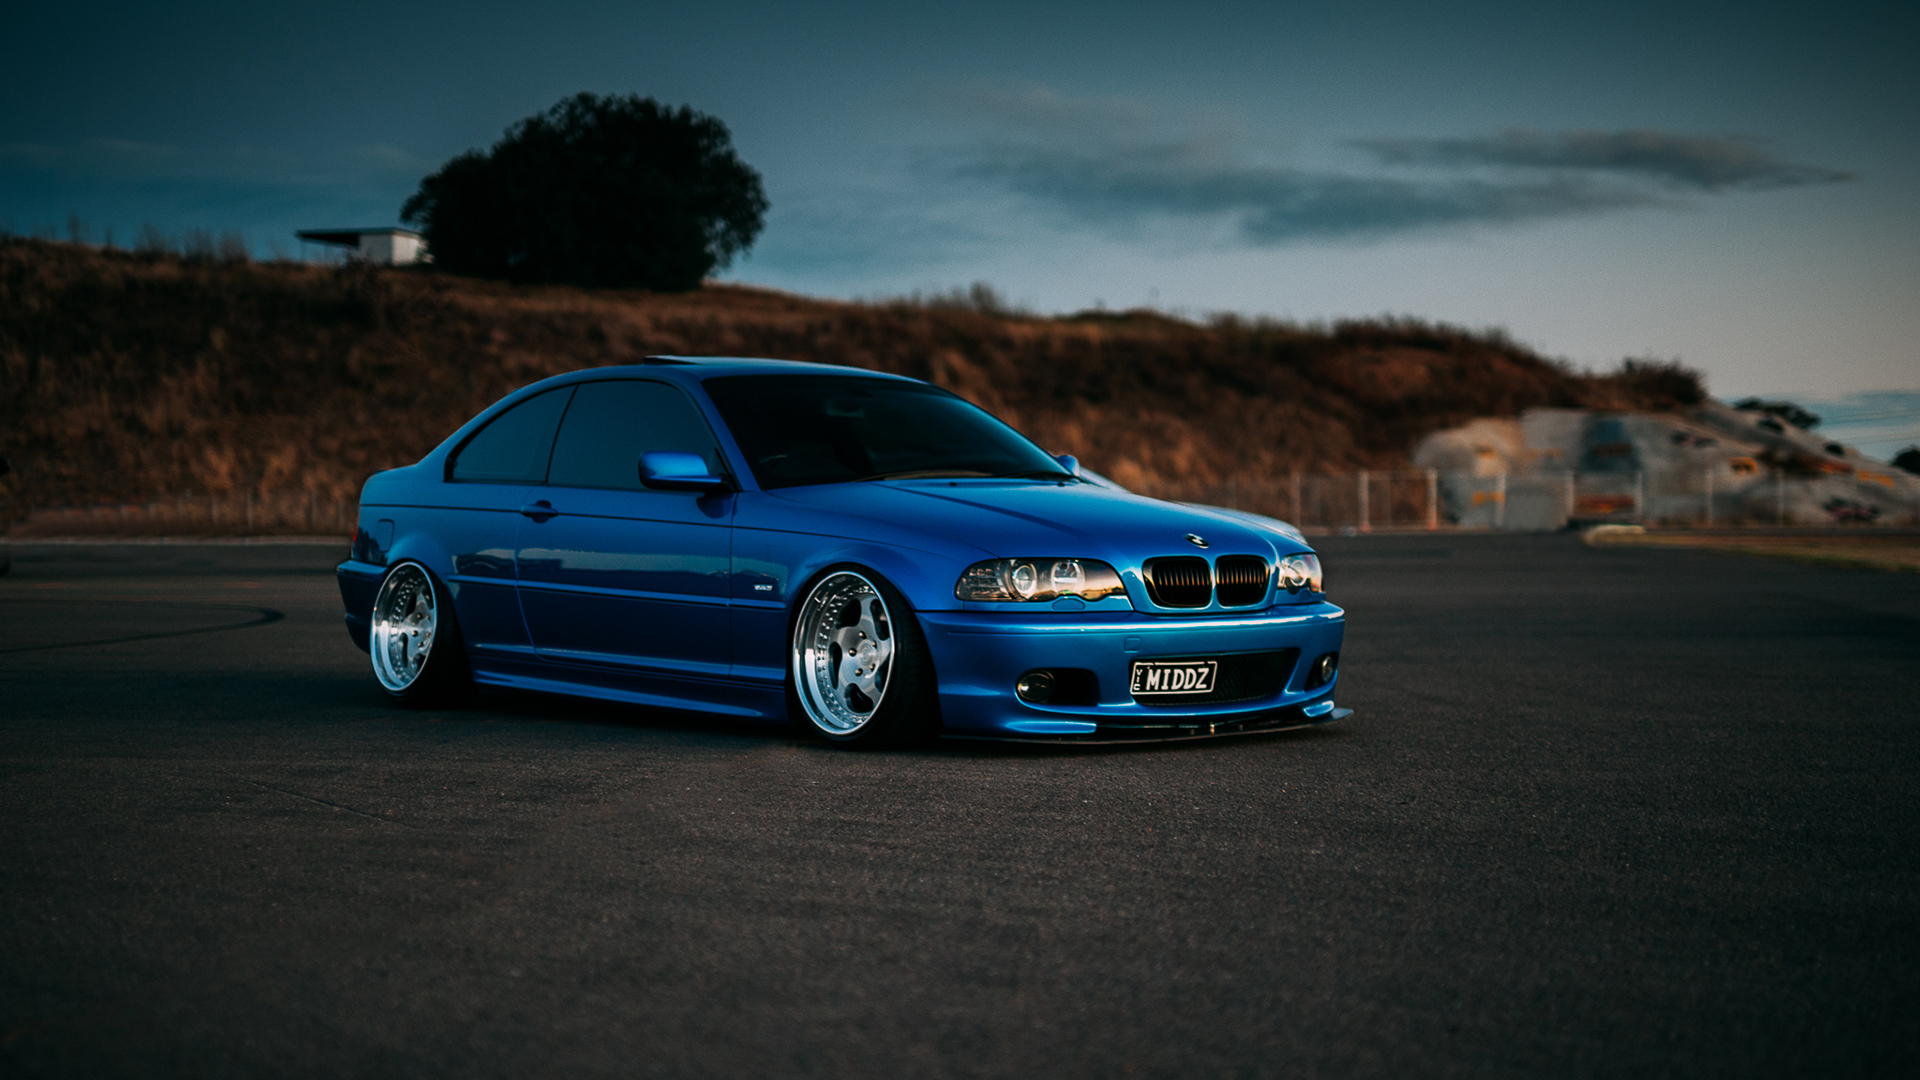 Bmw 3 Series E46 Wallpaper Fullhd Download Wallpapers Bmw M3 Tuning